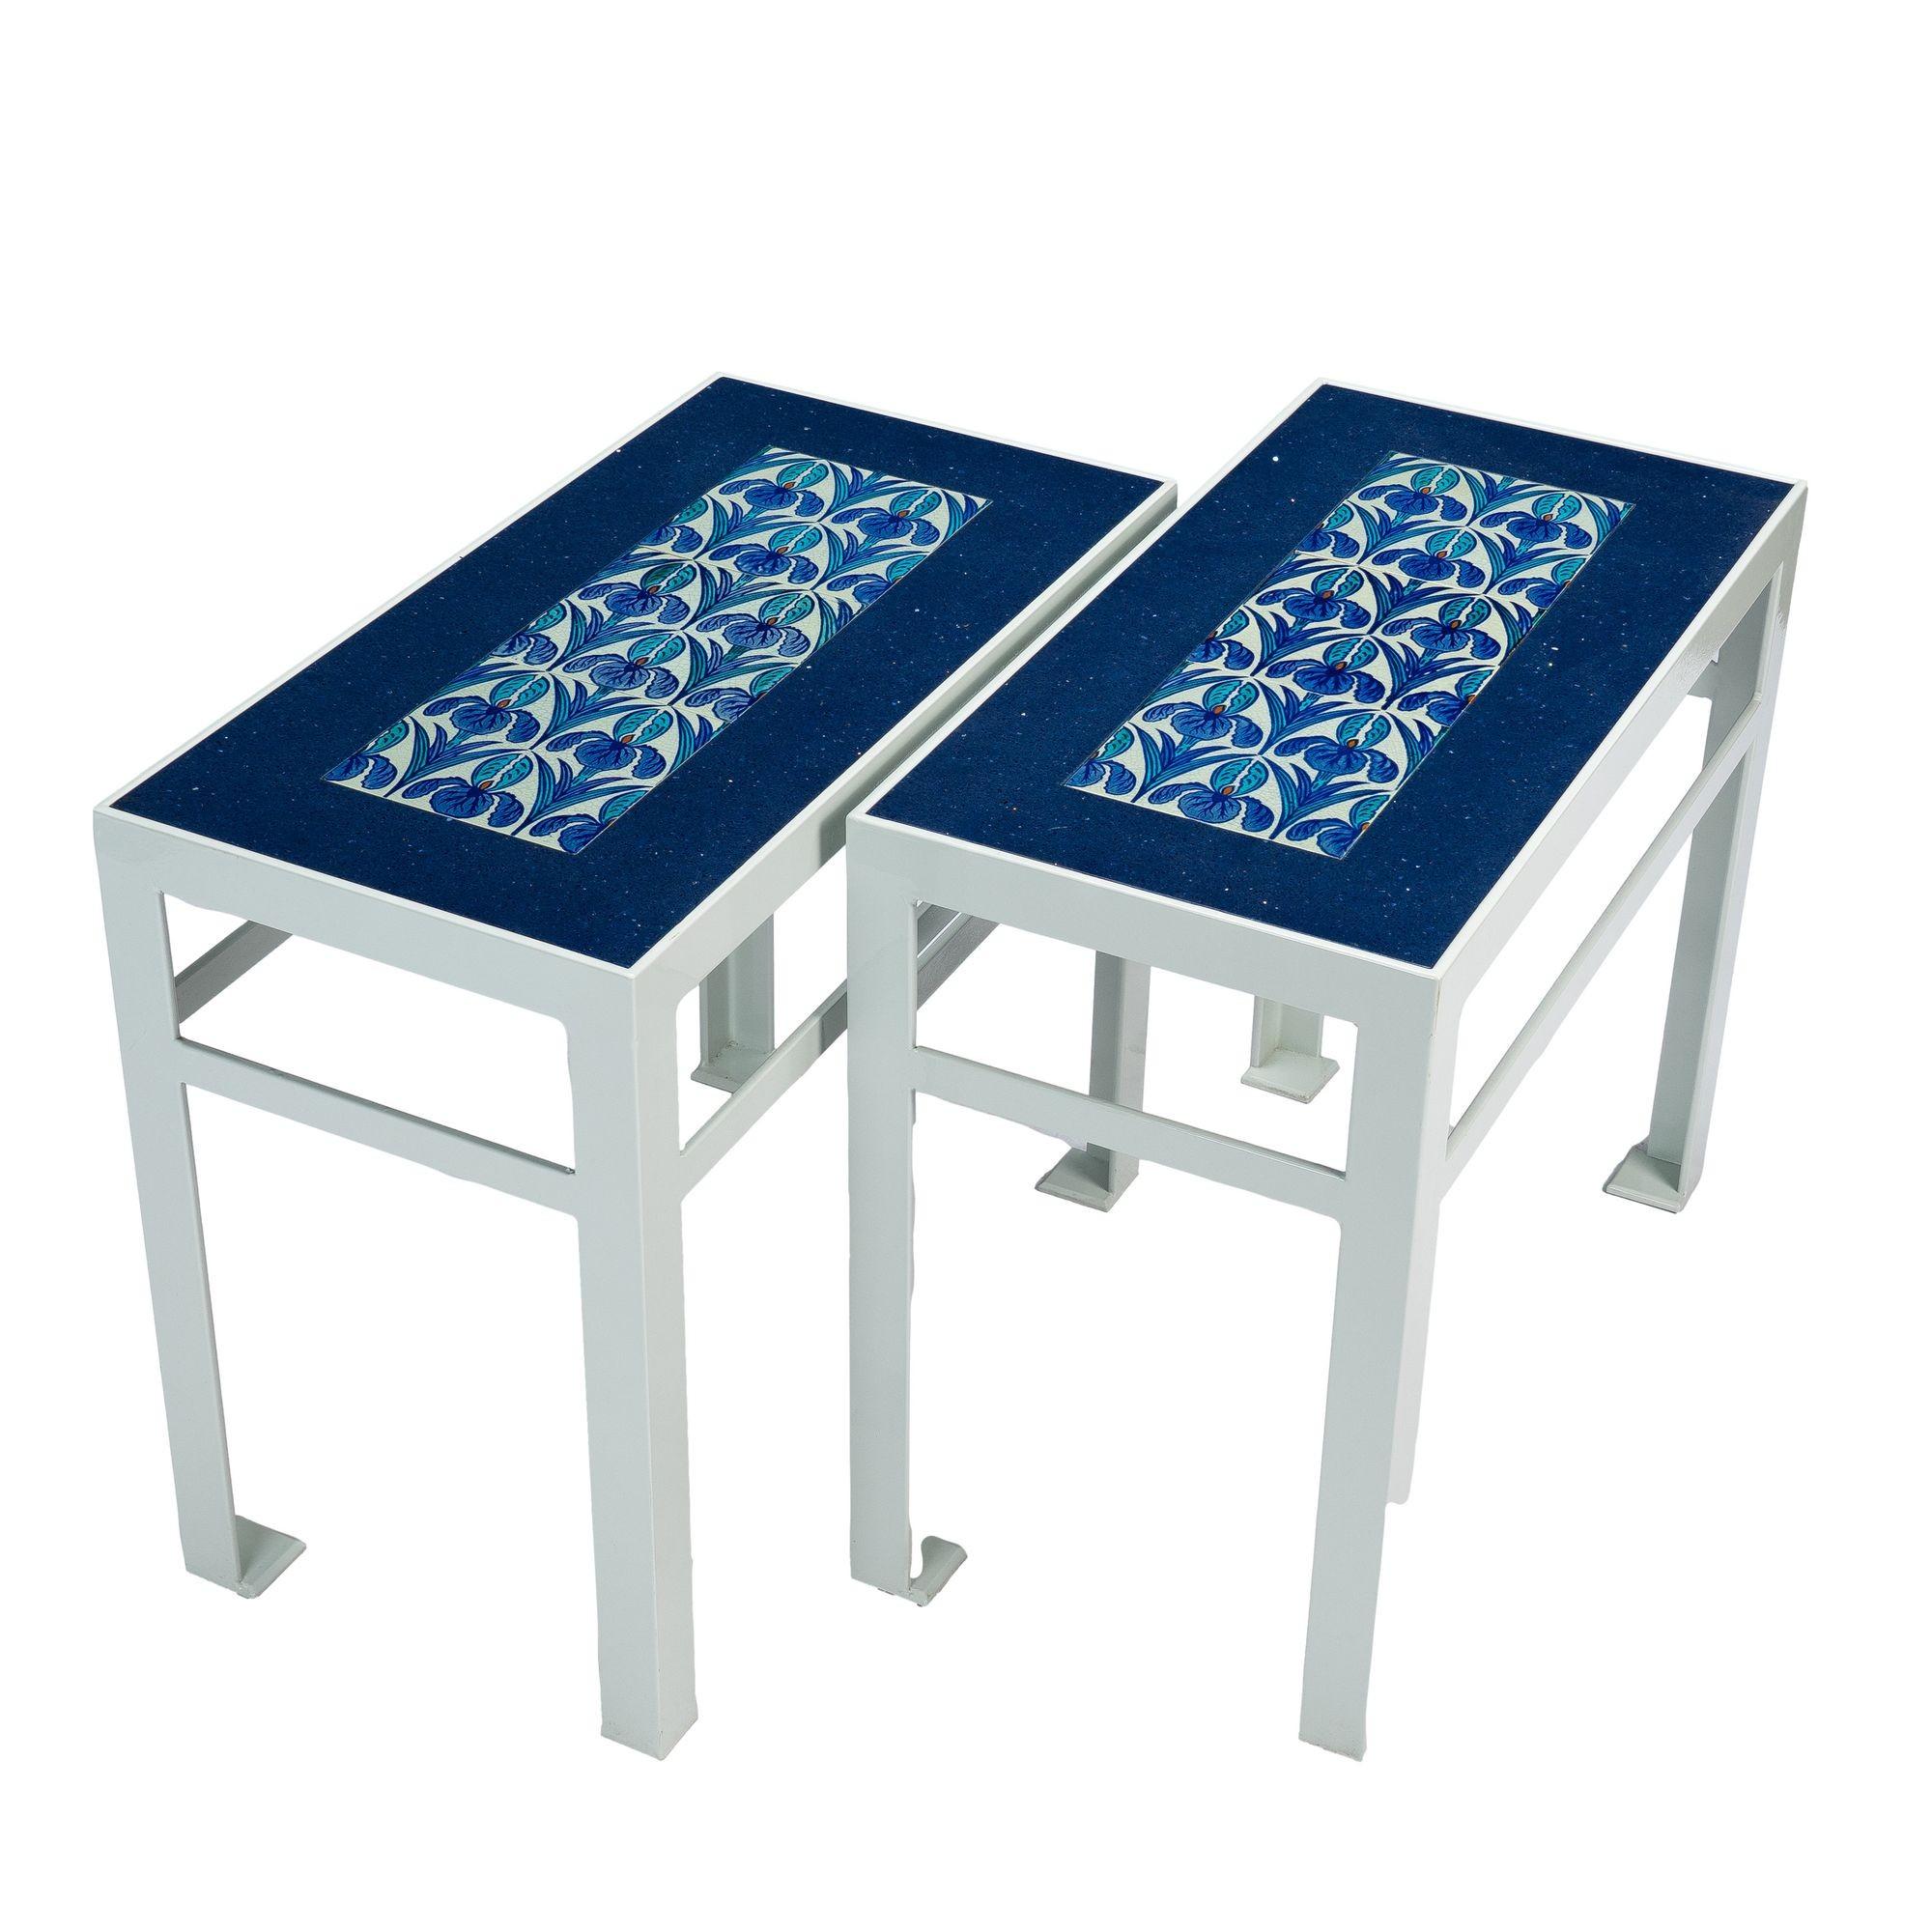 Pair of custom painted iron and framed marble and tile top tables. The blue marble tops are fitted with a set of Maw & Co tiles of an Iris transfer print in an interlocking art nouveau design. Maw & Co was the leading English tile making firm of the